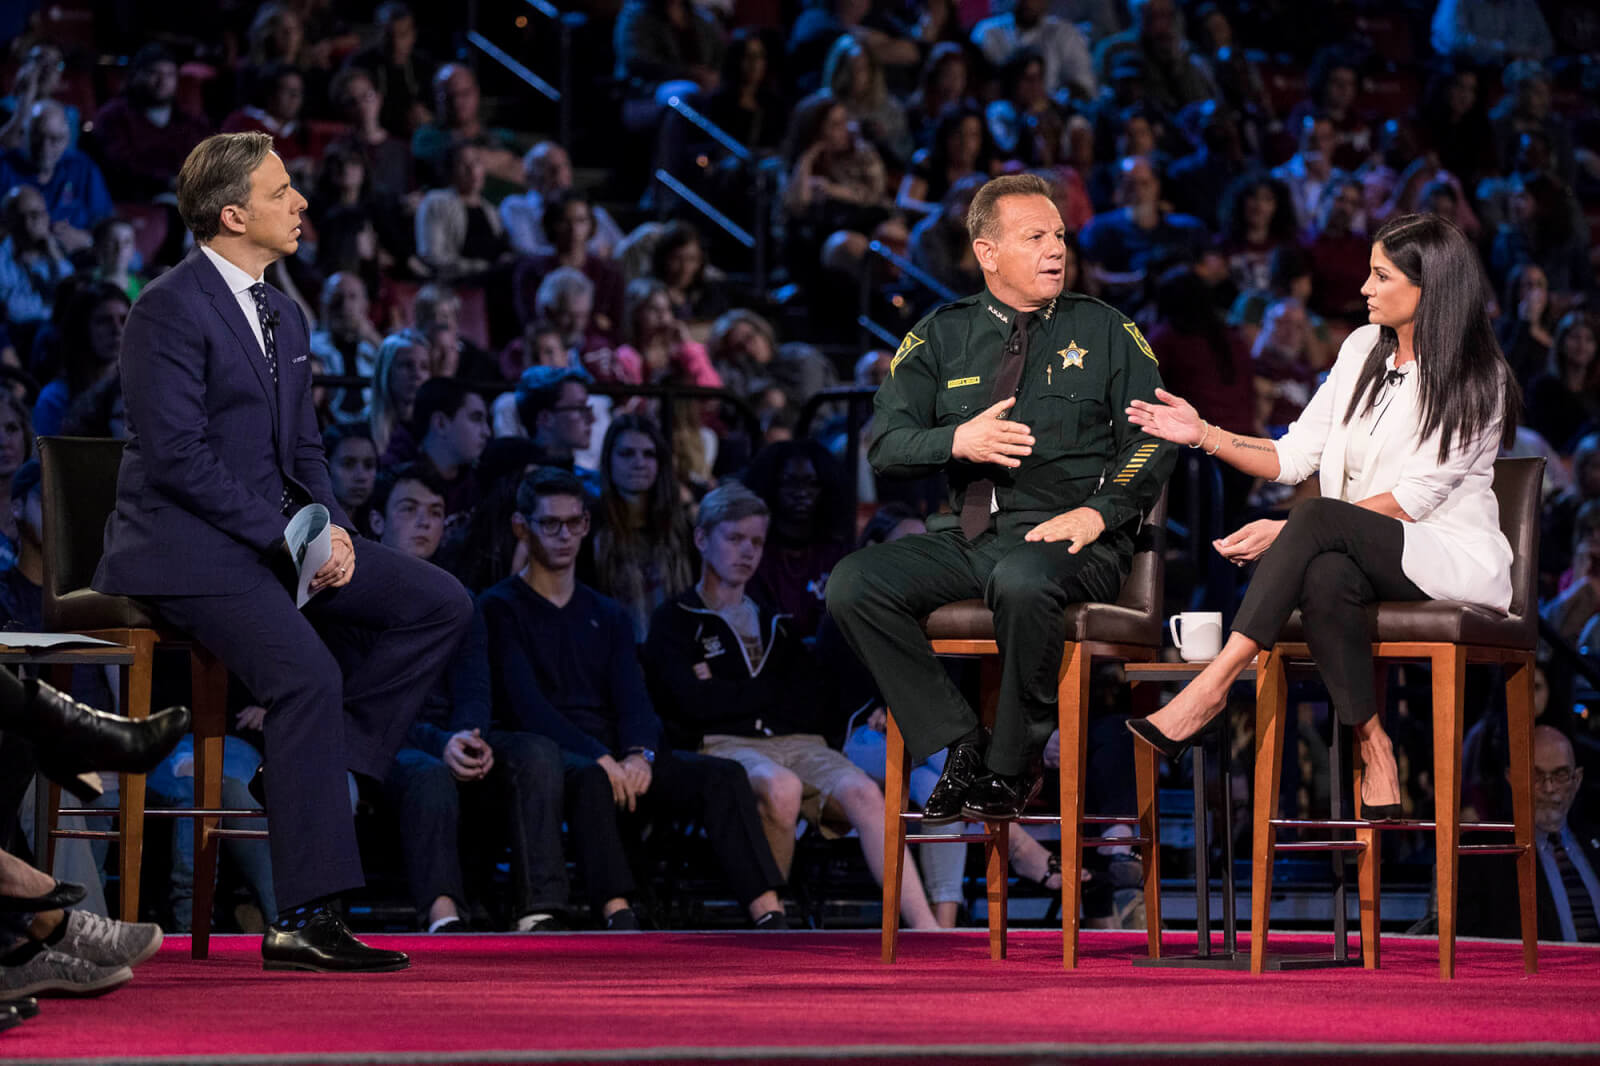 CNN anchor Jake Tapper, Broward County Sheriff Scott Israel and NRA spokesperson Dana Loesch at the CNN Town Hall at the BB&T Center